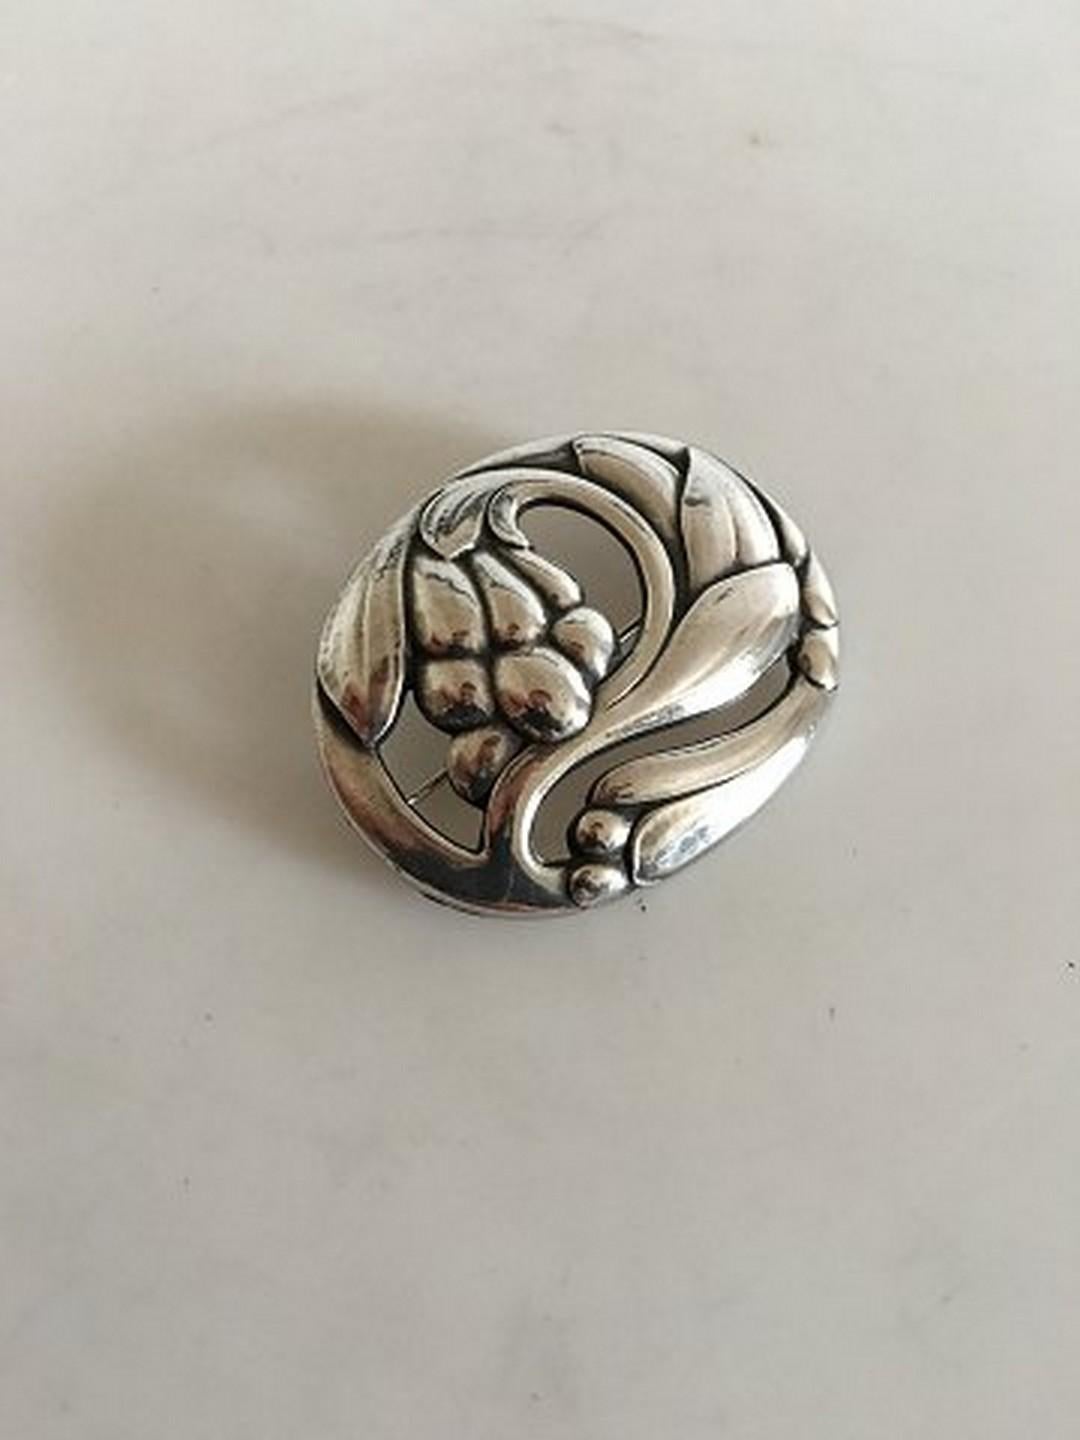 Georg Jensen Sterling Silver Brooch No 65. Measures 5 cm / 1 31/32 in. Weighs 15 g / 0.55 oz. From 1932-1945